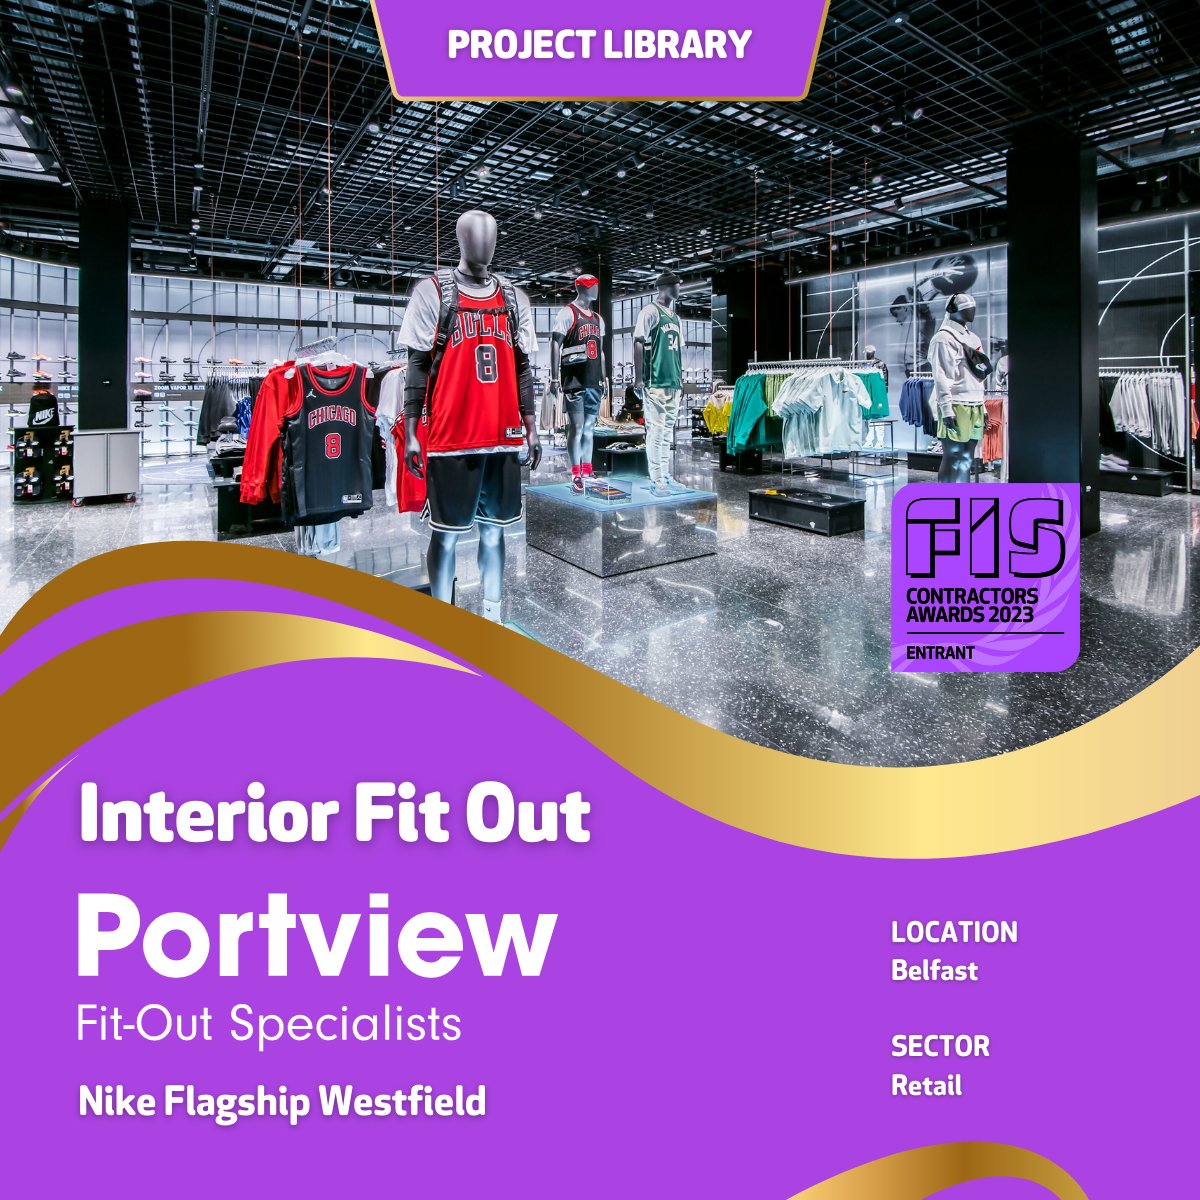 Here is a look at @PortviewFitOut's Interior Fit Out of Nikes flagship store in Westfield, Belfast

Click here for full details about this project and others like it: thefis.org/project-librar…